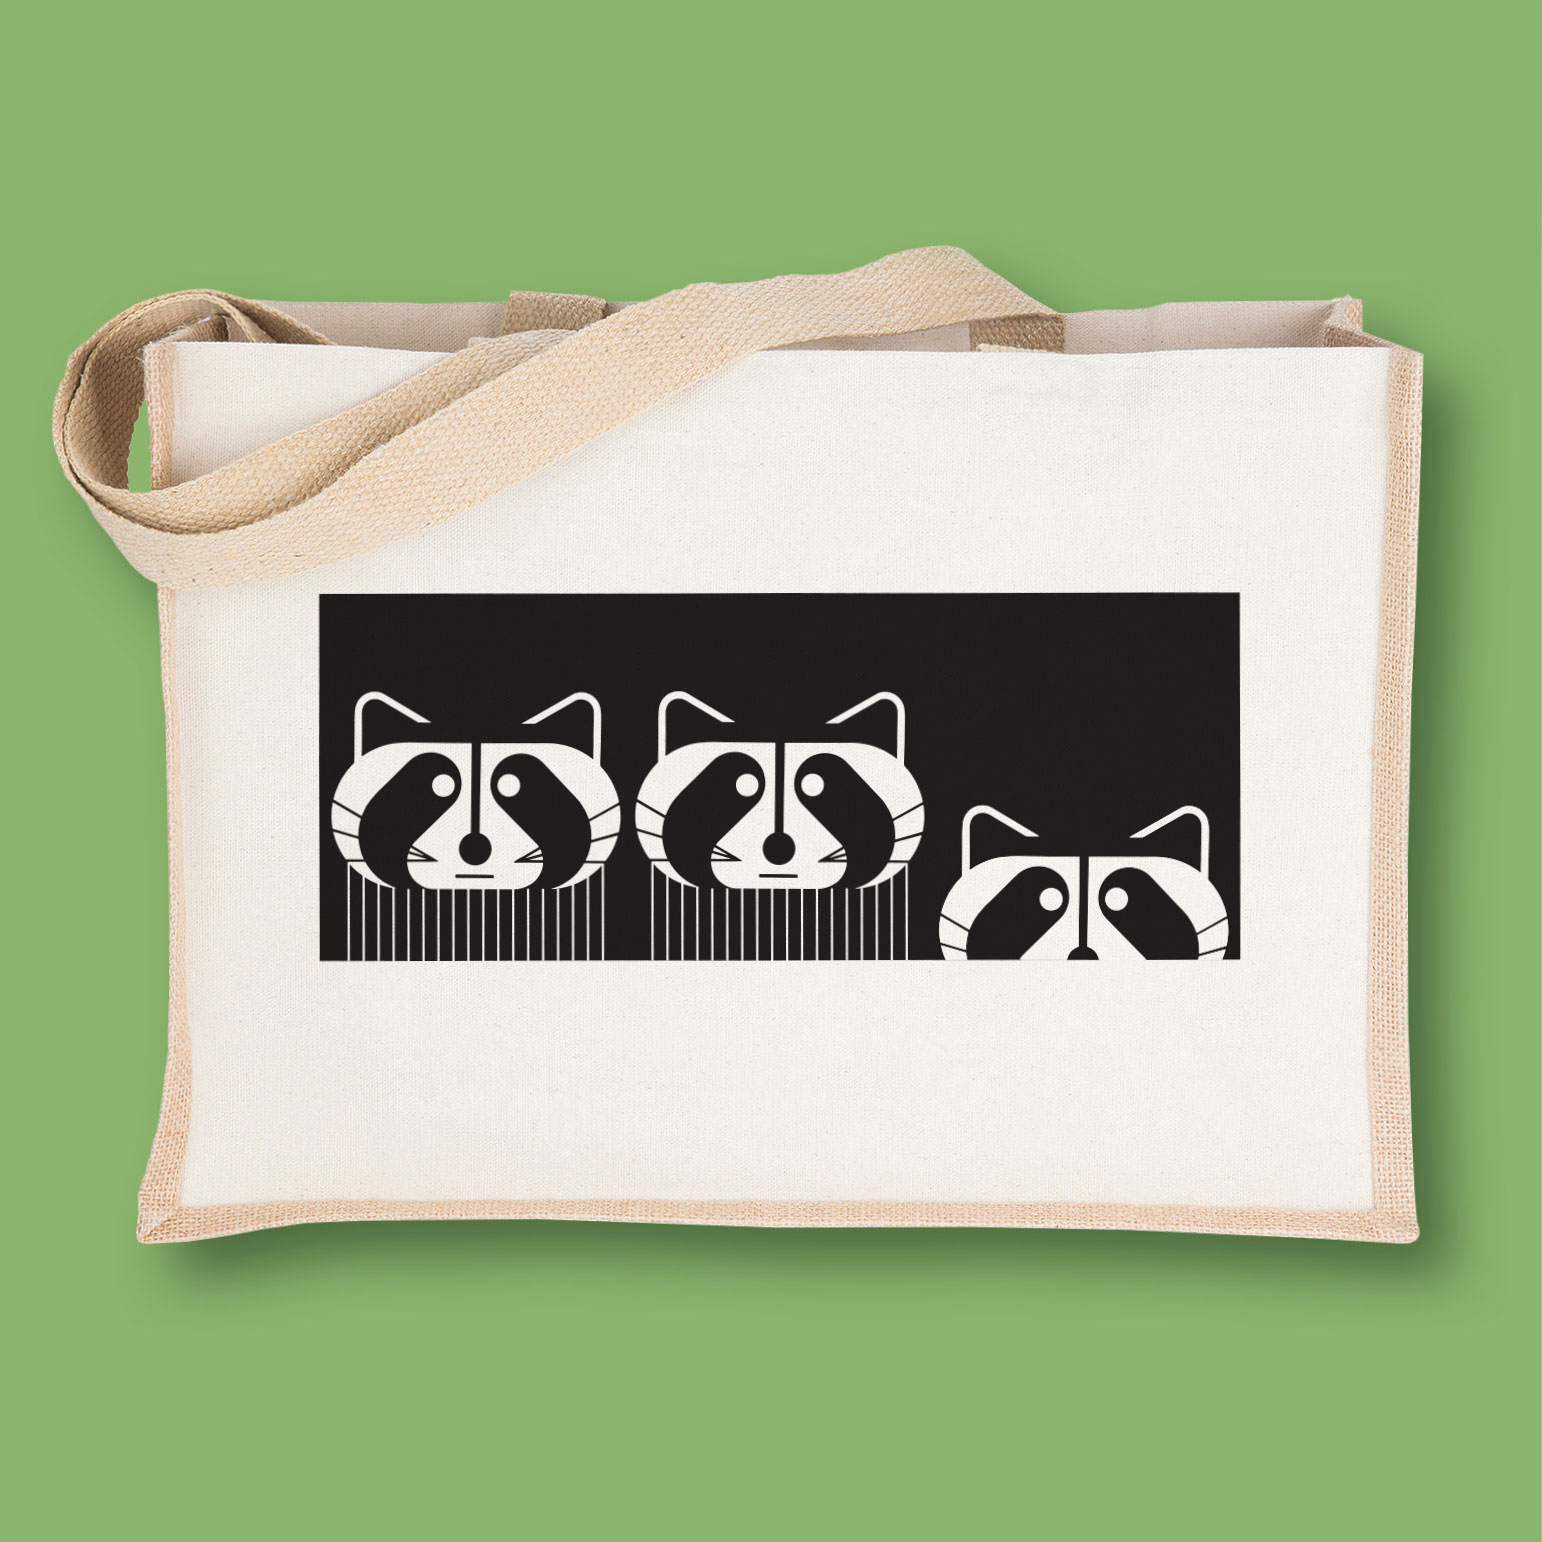 Canvas bag with screen printed raccoons on front.